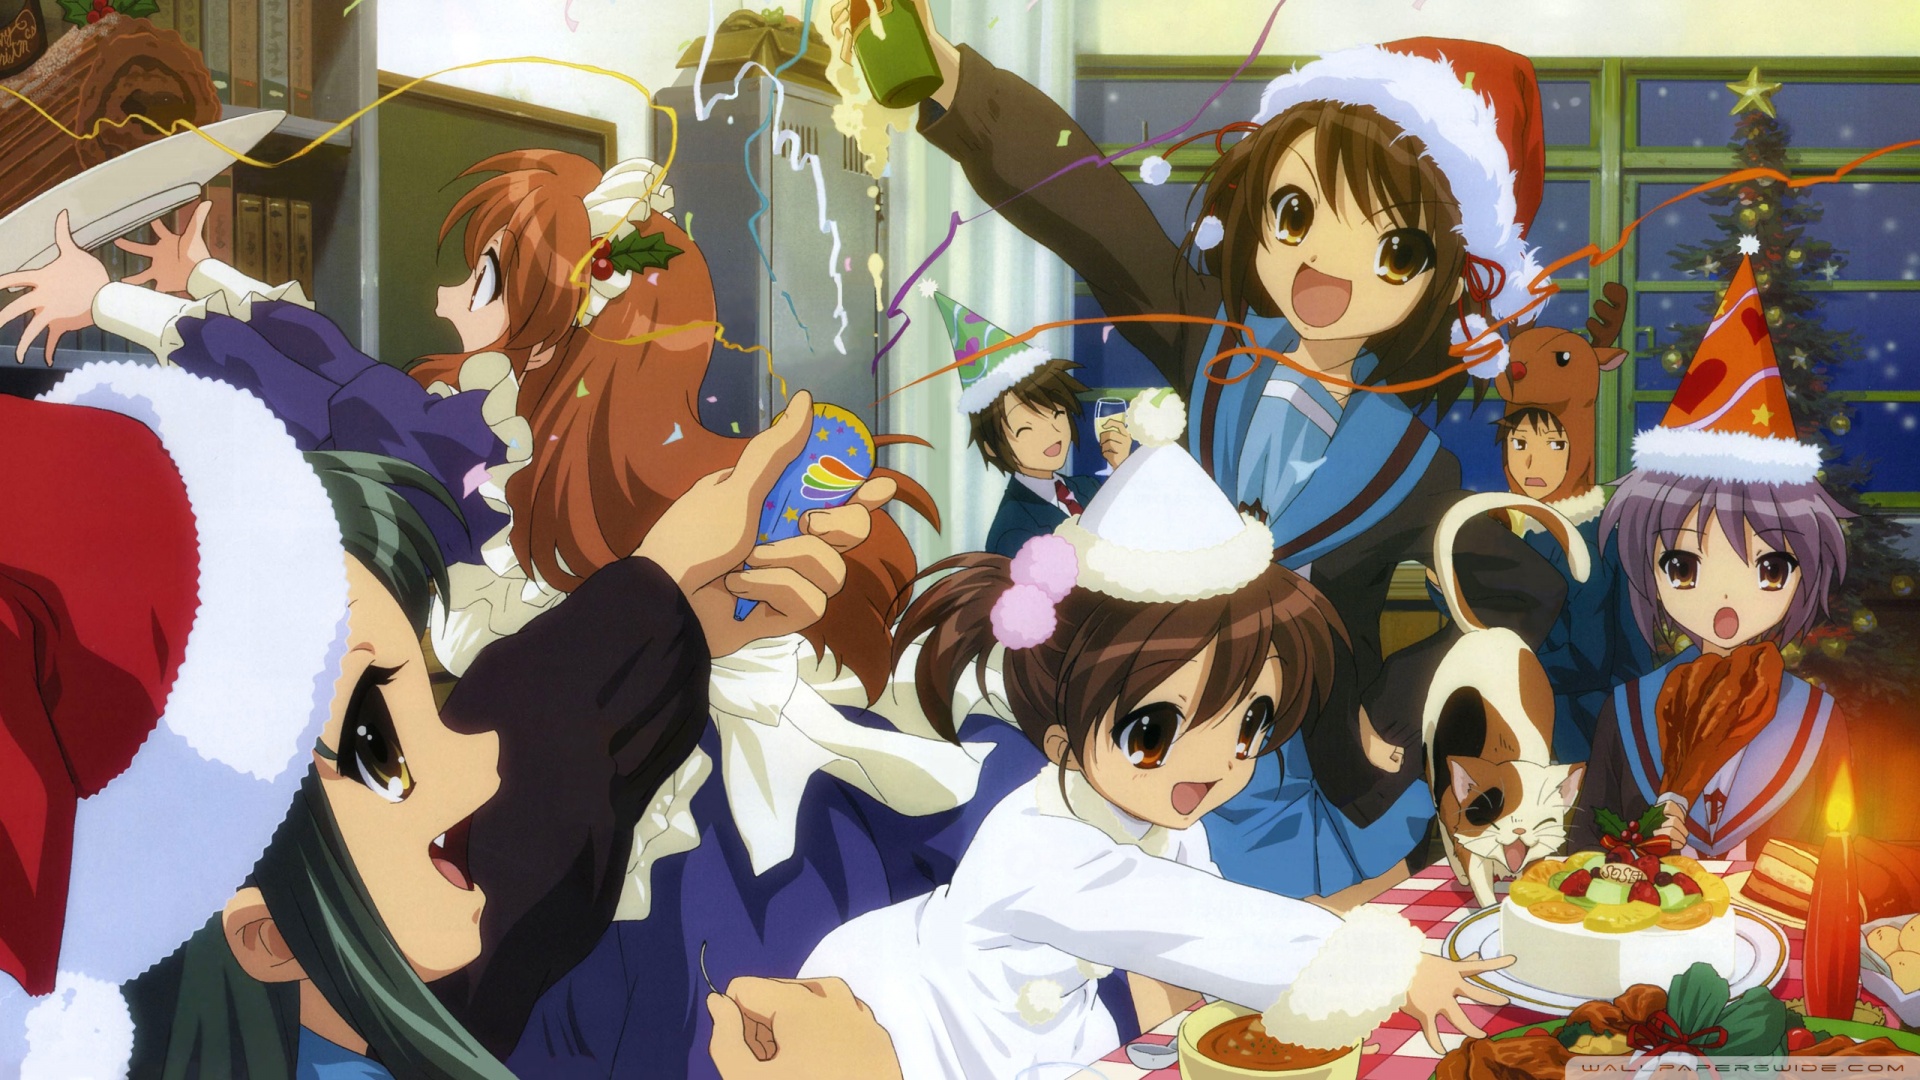 The Melancholy Of Haruhi Suzumiya Backgrounds, Compatible - PC, Mobile, Gadgets| 1920x1080 px